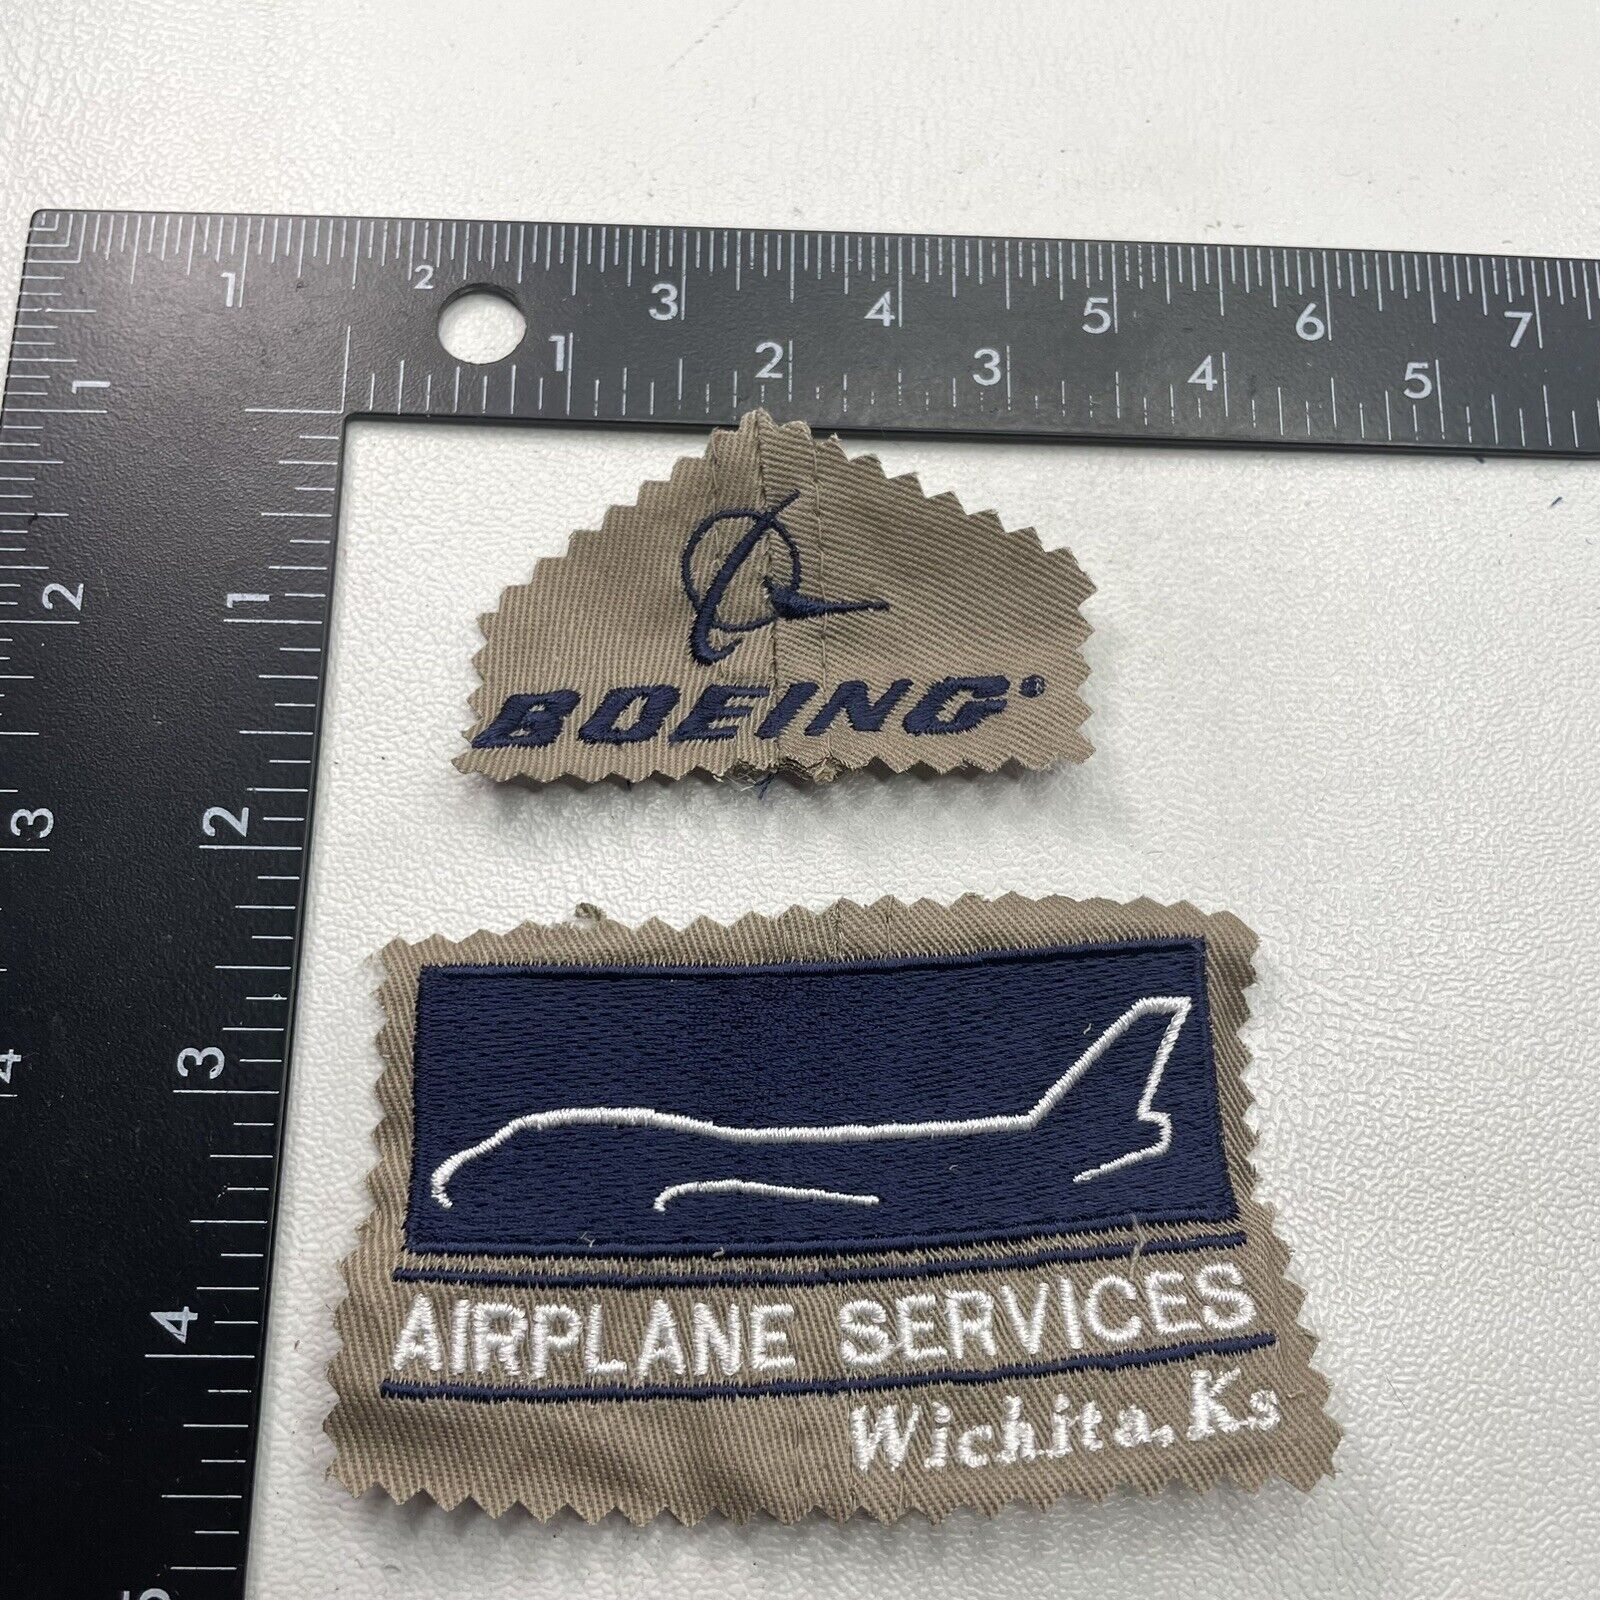 Zig-Zag-Cut-From-Hat 2 Patch-ish Pieces BOEING AIRPLANE SERVICES WICHITA KS 32R6